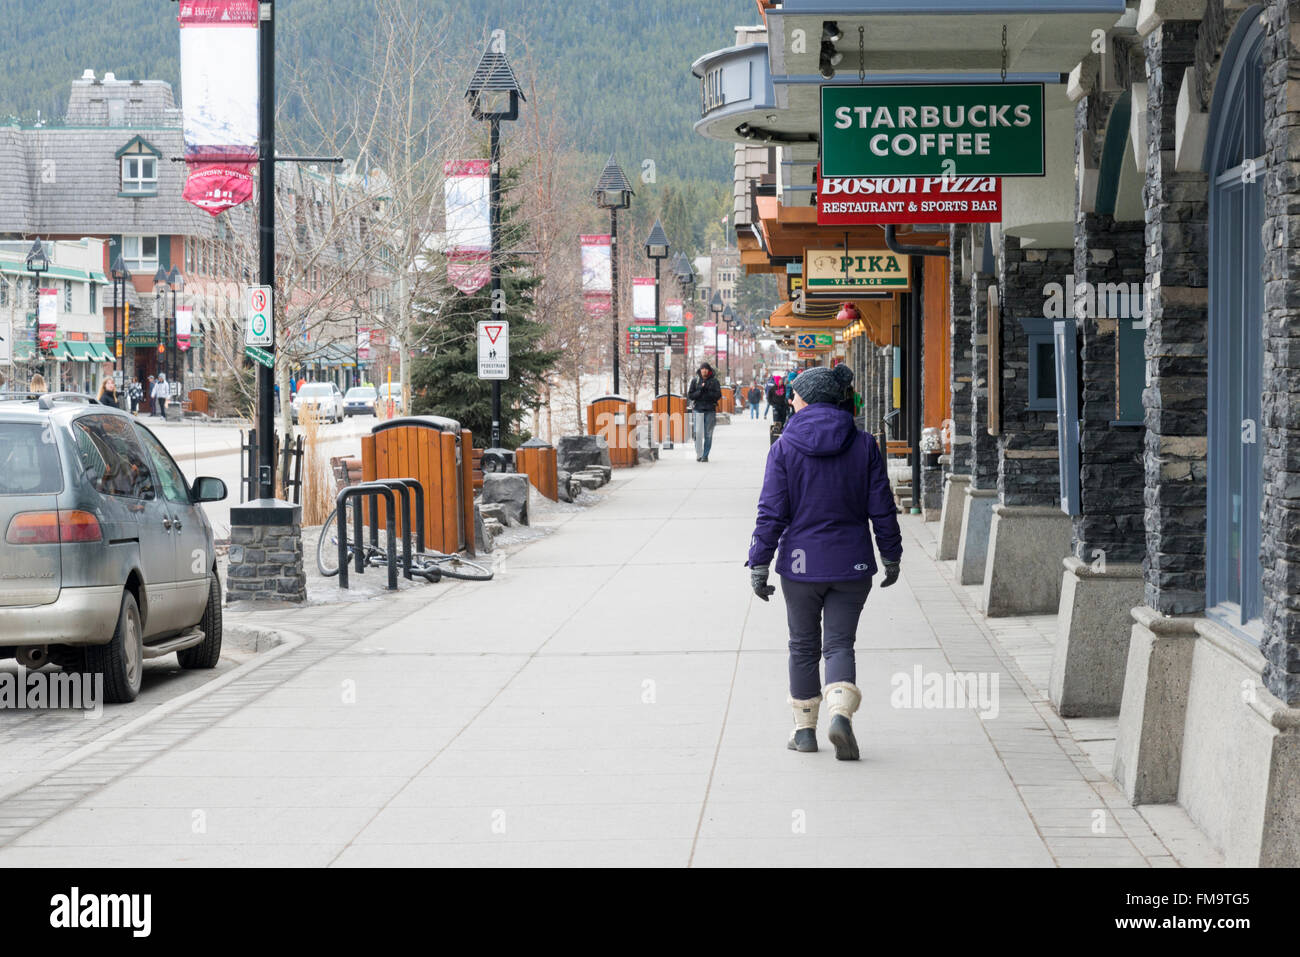 A shopper walking in Banff Avenue Banff Canada by Starbucks and tourist shops Stock Photo